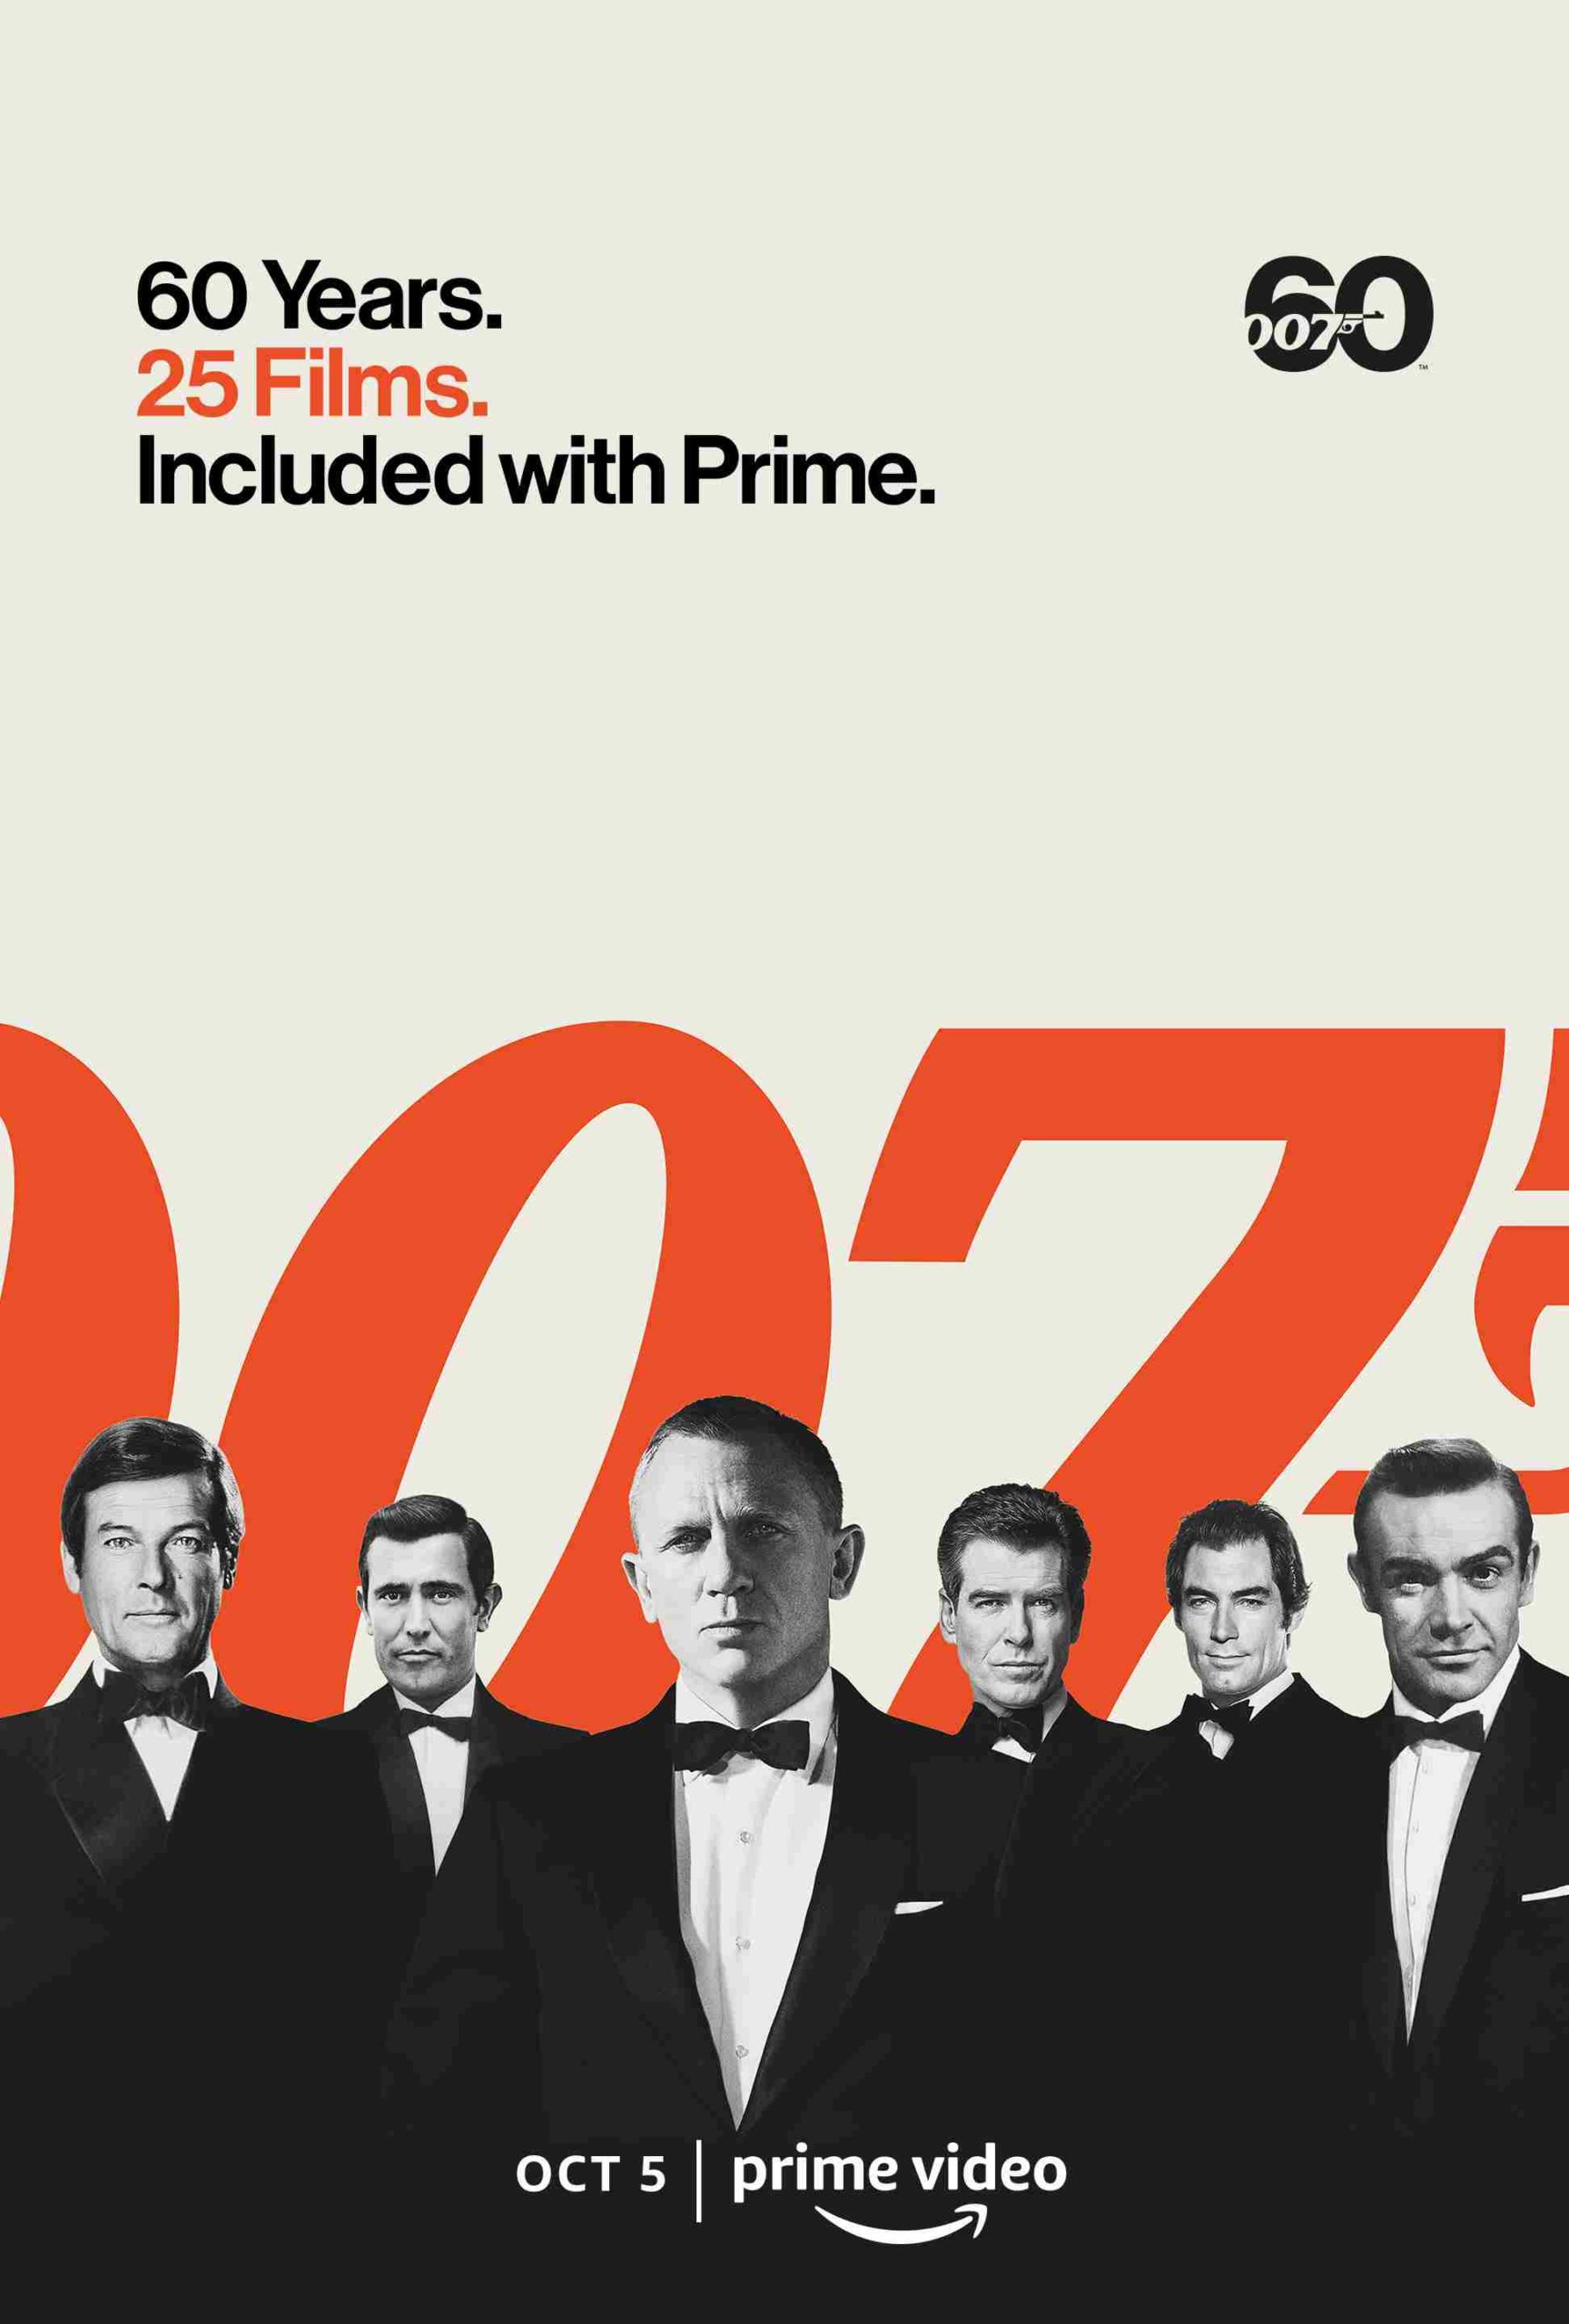 60 Years of Bond Poster